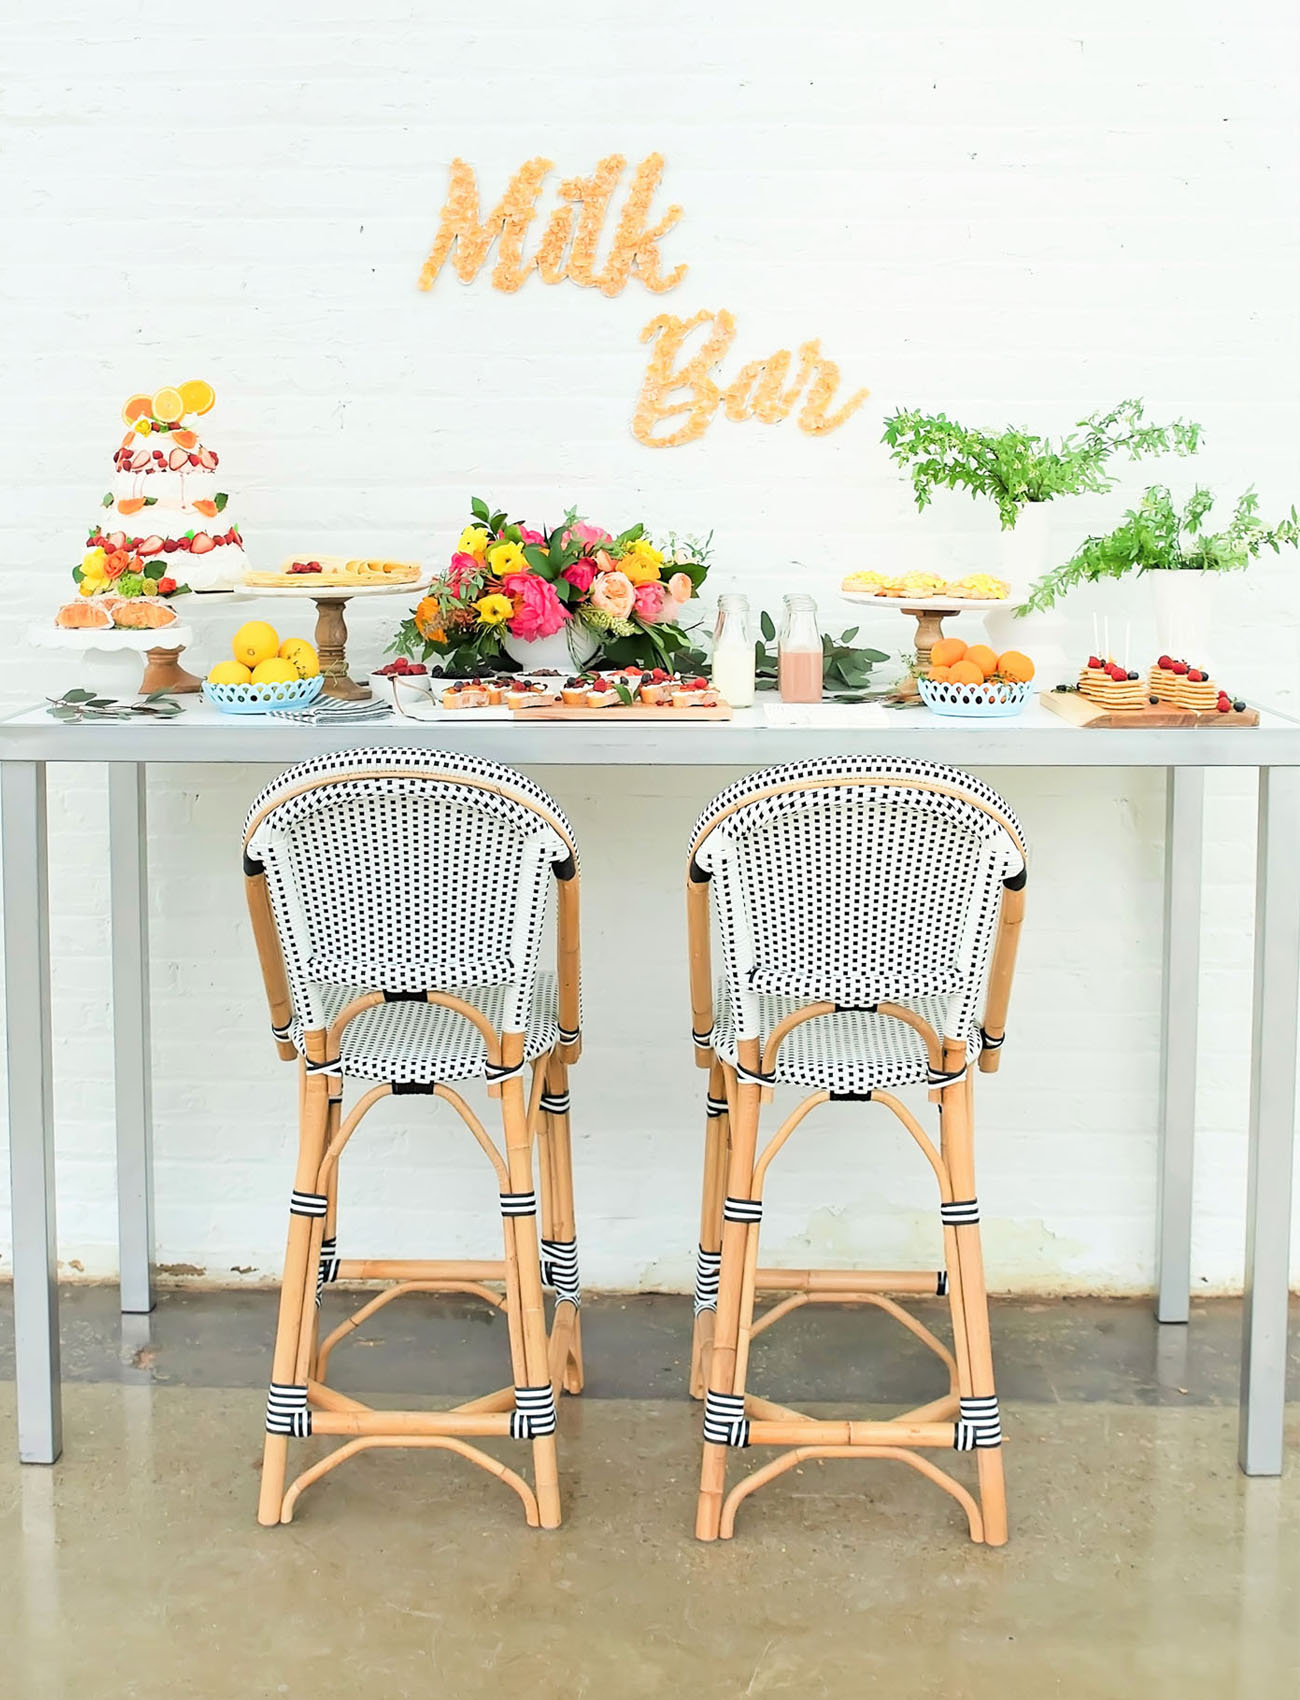 Farm to Table Brunch Inspiration